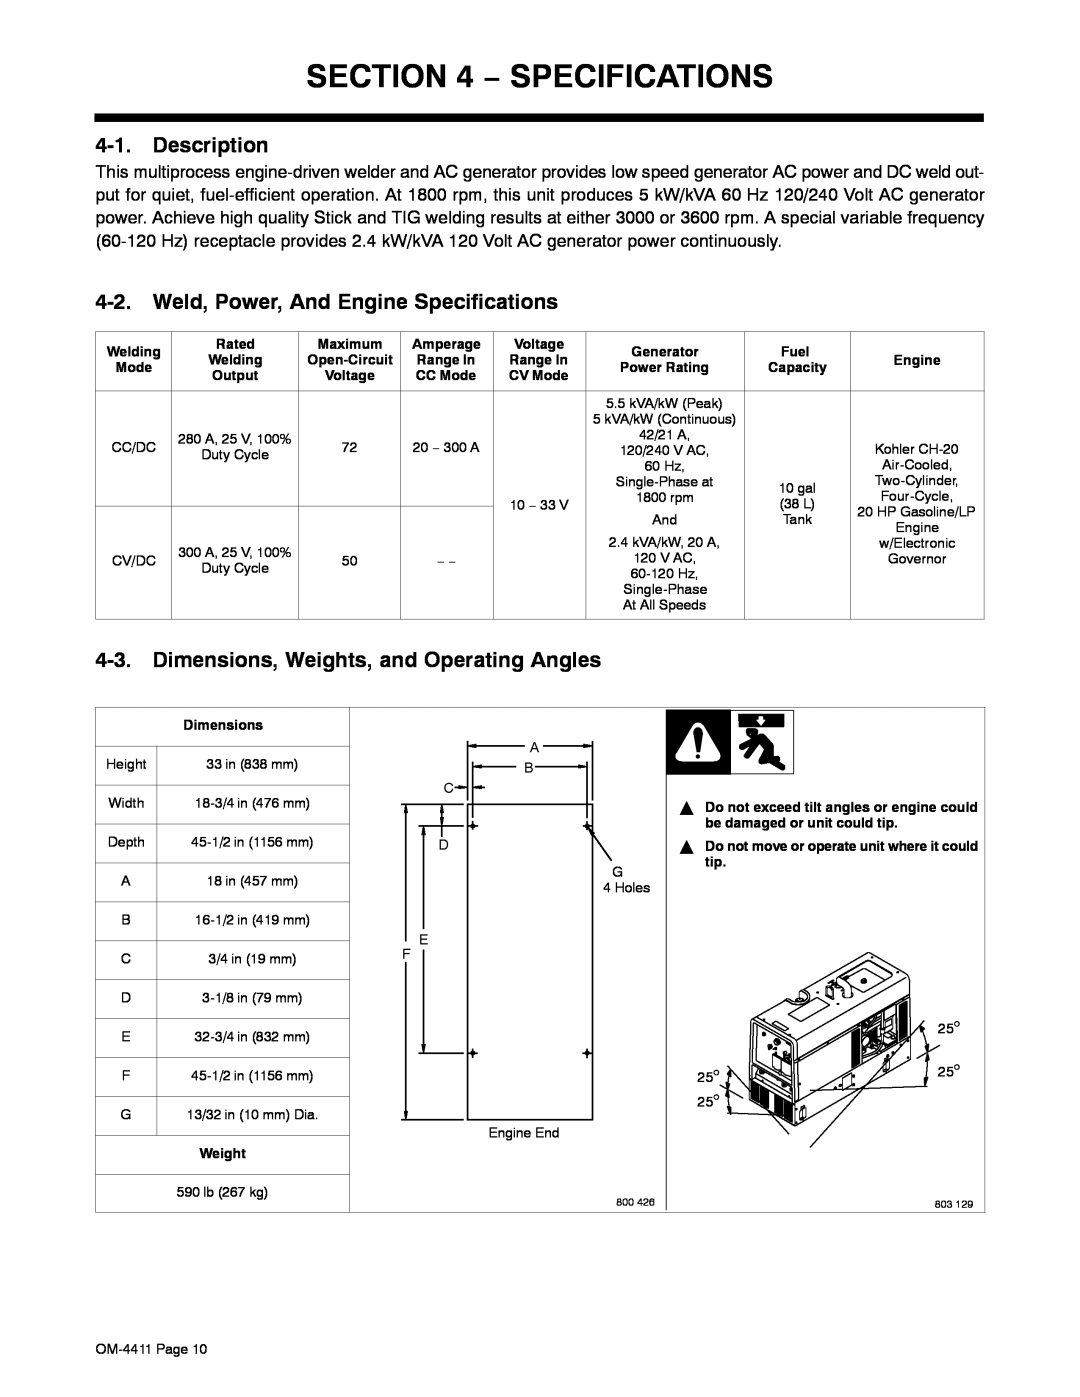 Miller Electric 301 G Description, Weld, Power, And Engine Specifications, Dimensions, Weights, and Operating Angles 